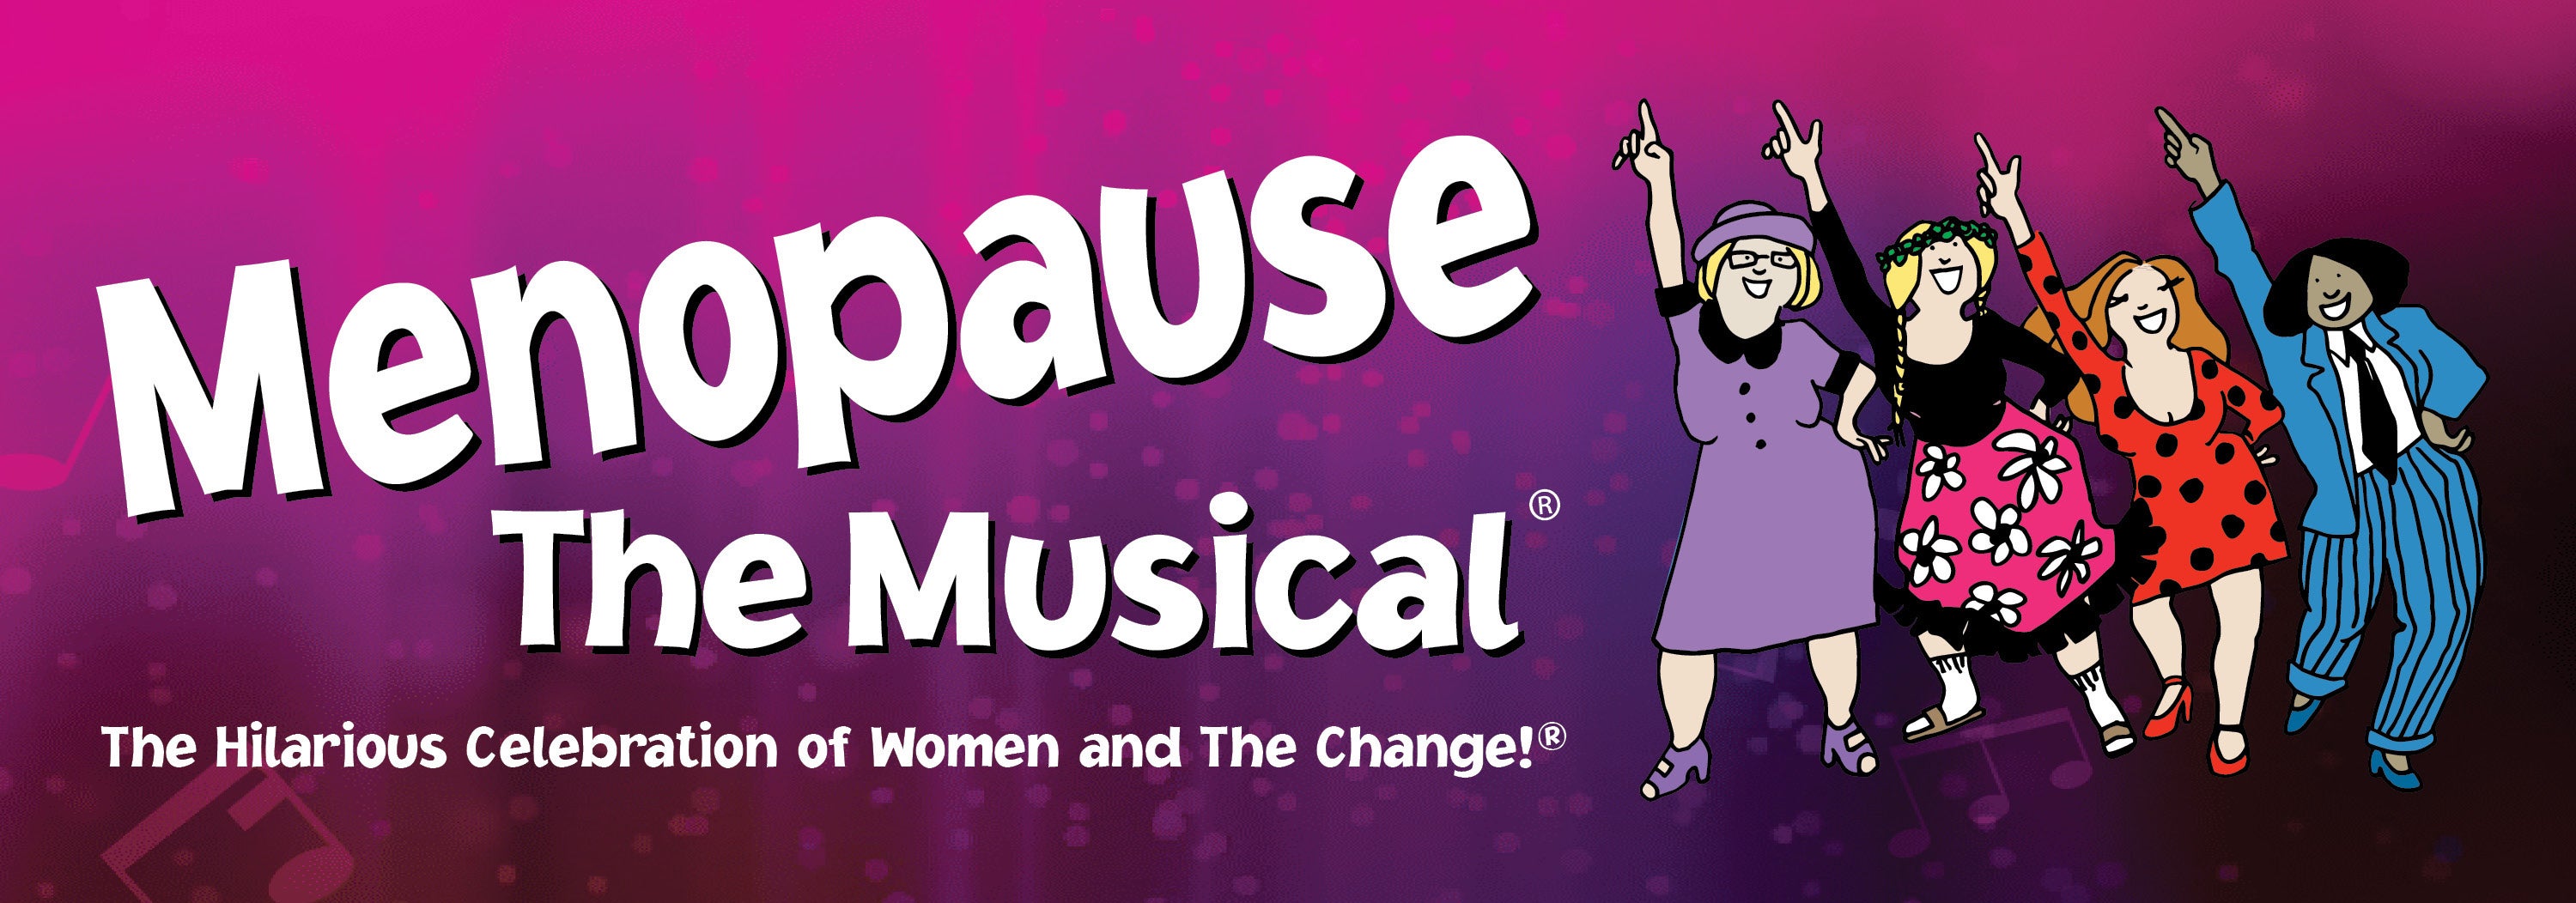 Menopause The Musical ® 